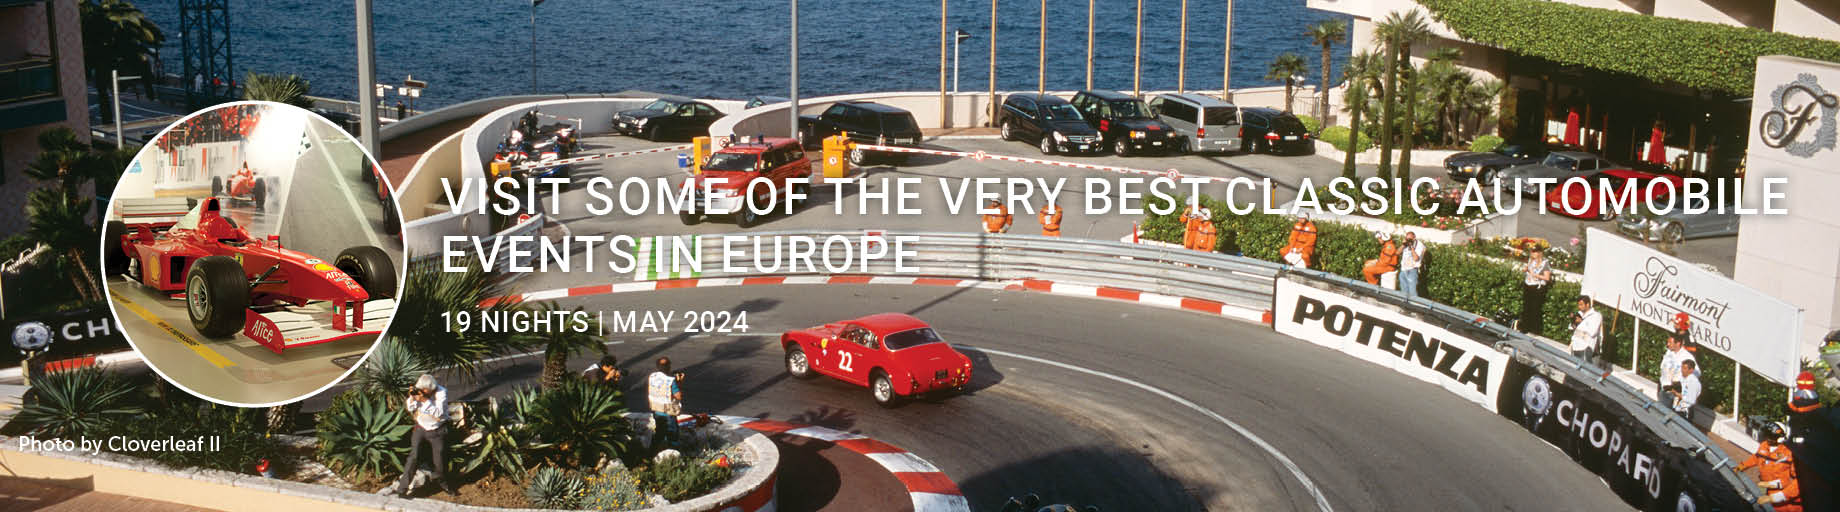 Classic Automobile tour to Italy, France and Germany